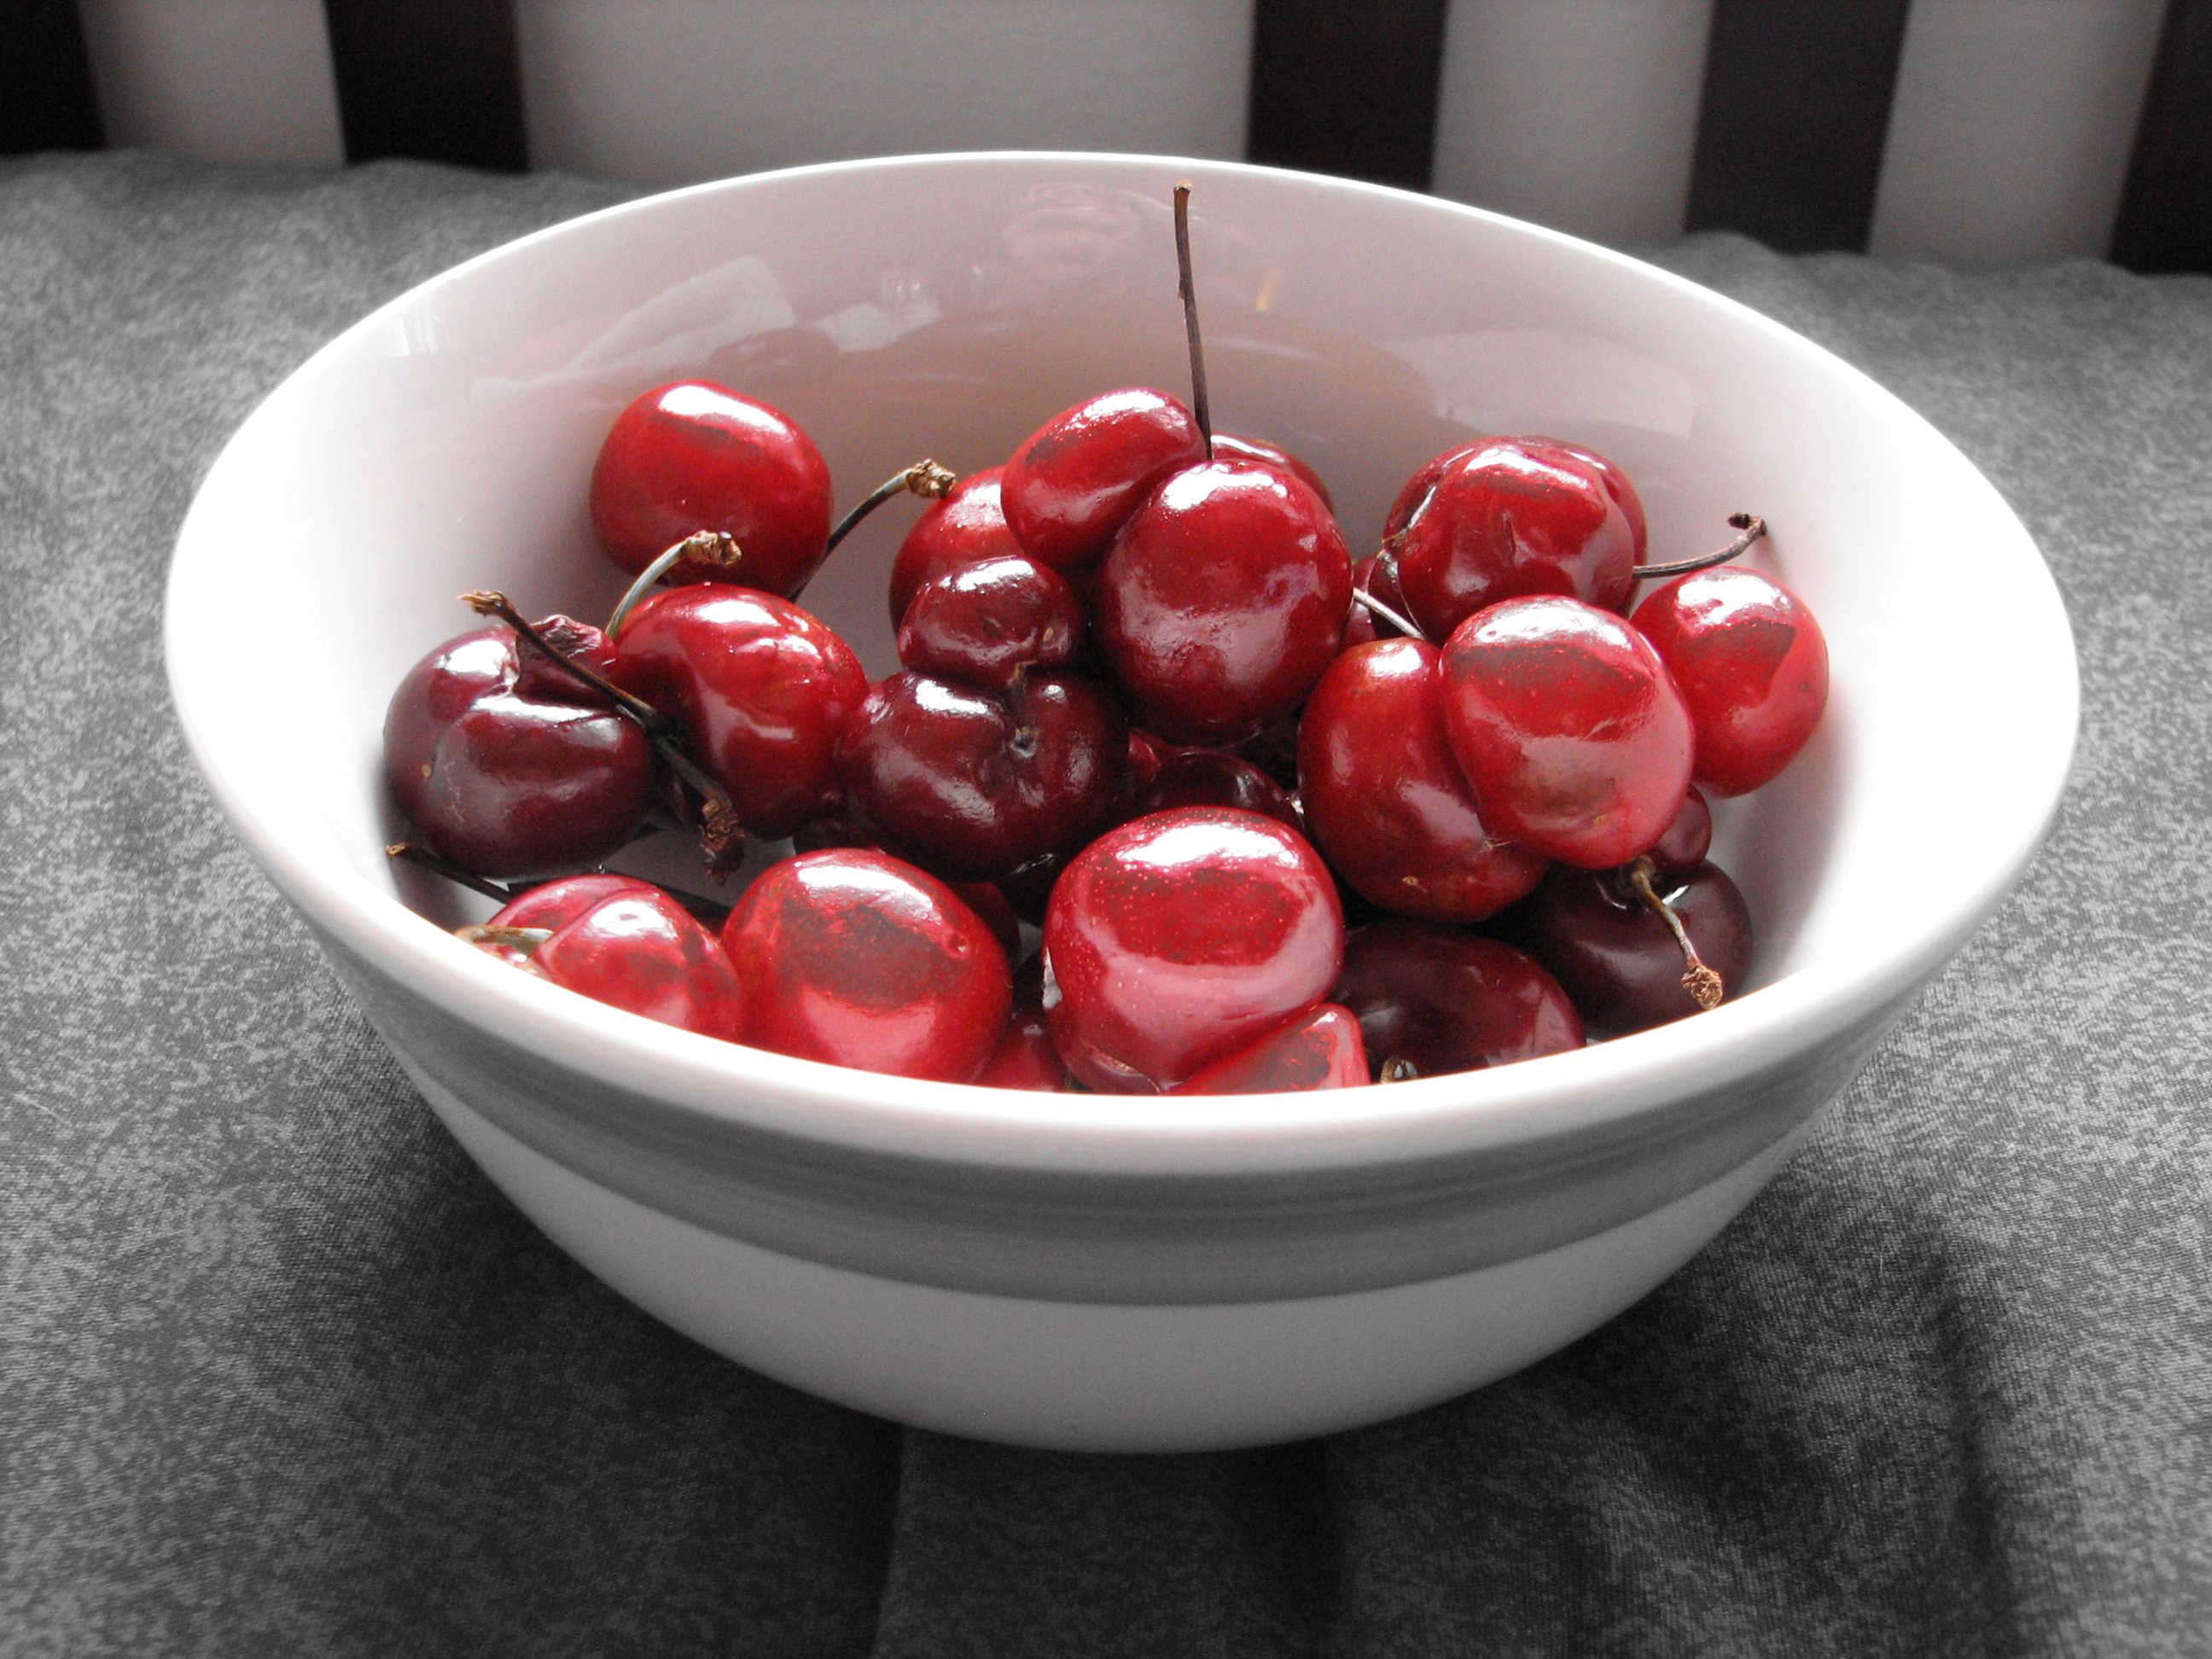 Bowl of cherries with red accent